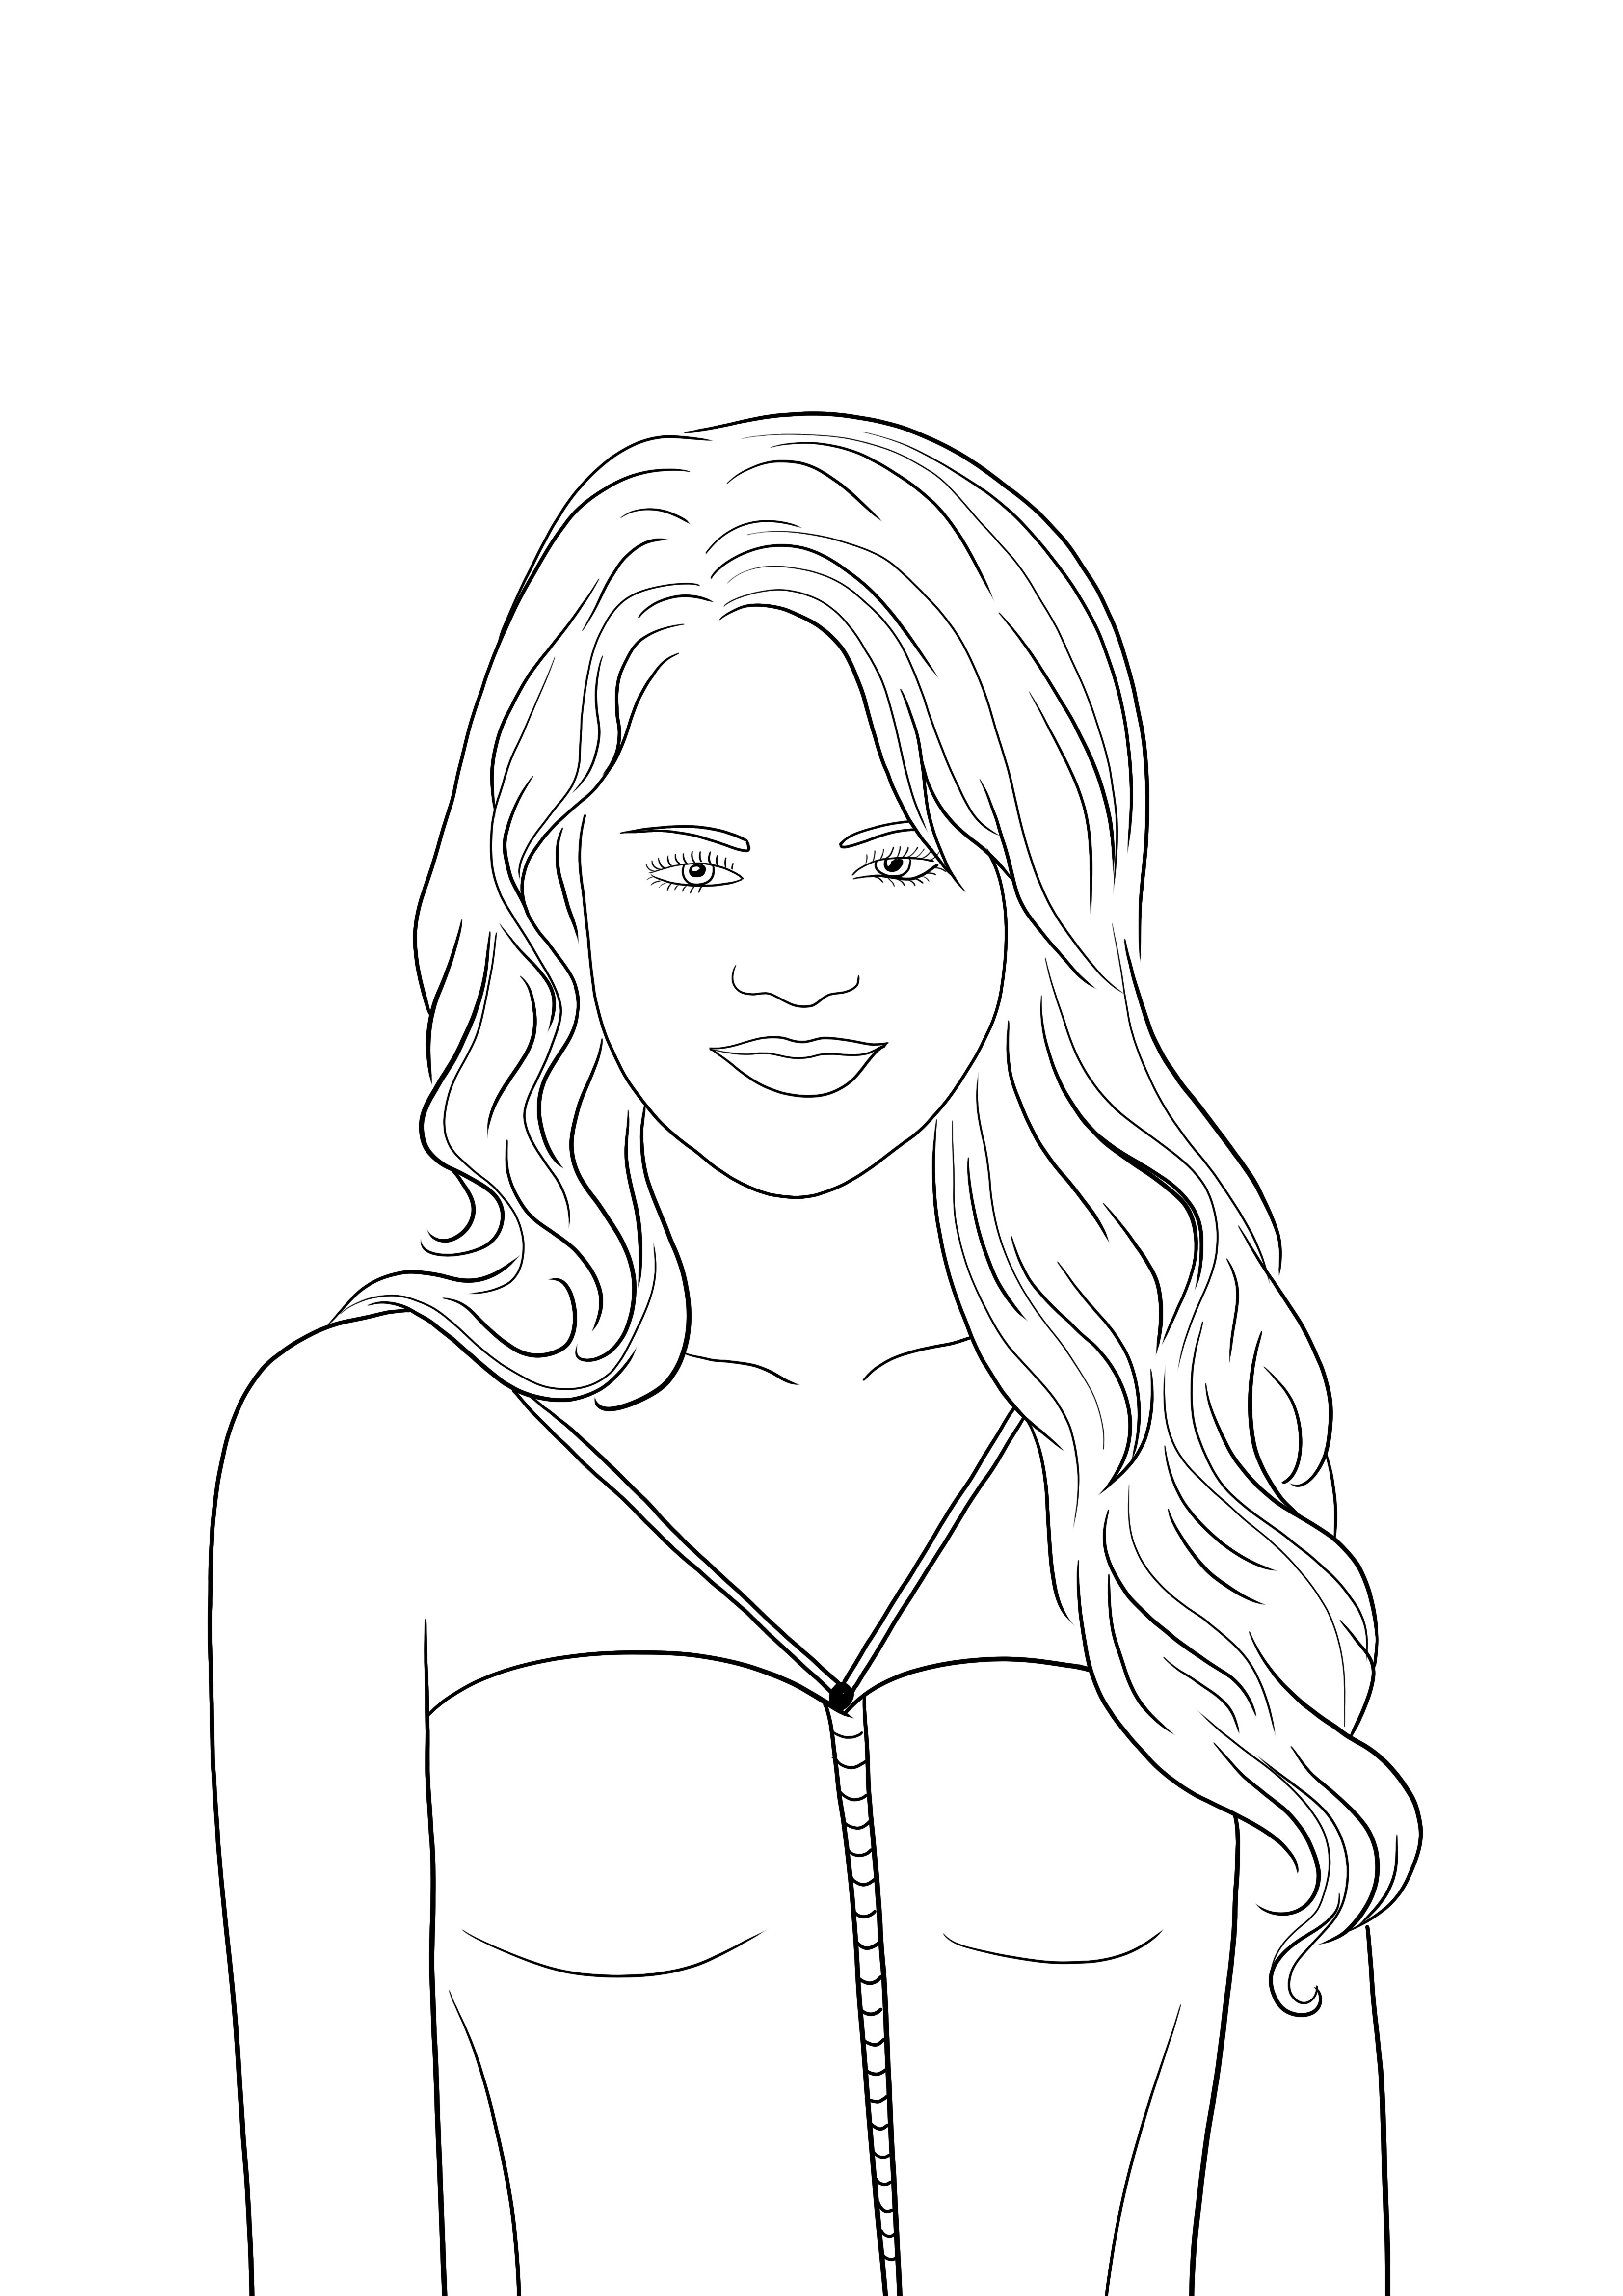 Selena Gomez coloring and free downloading picture